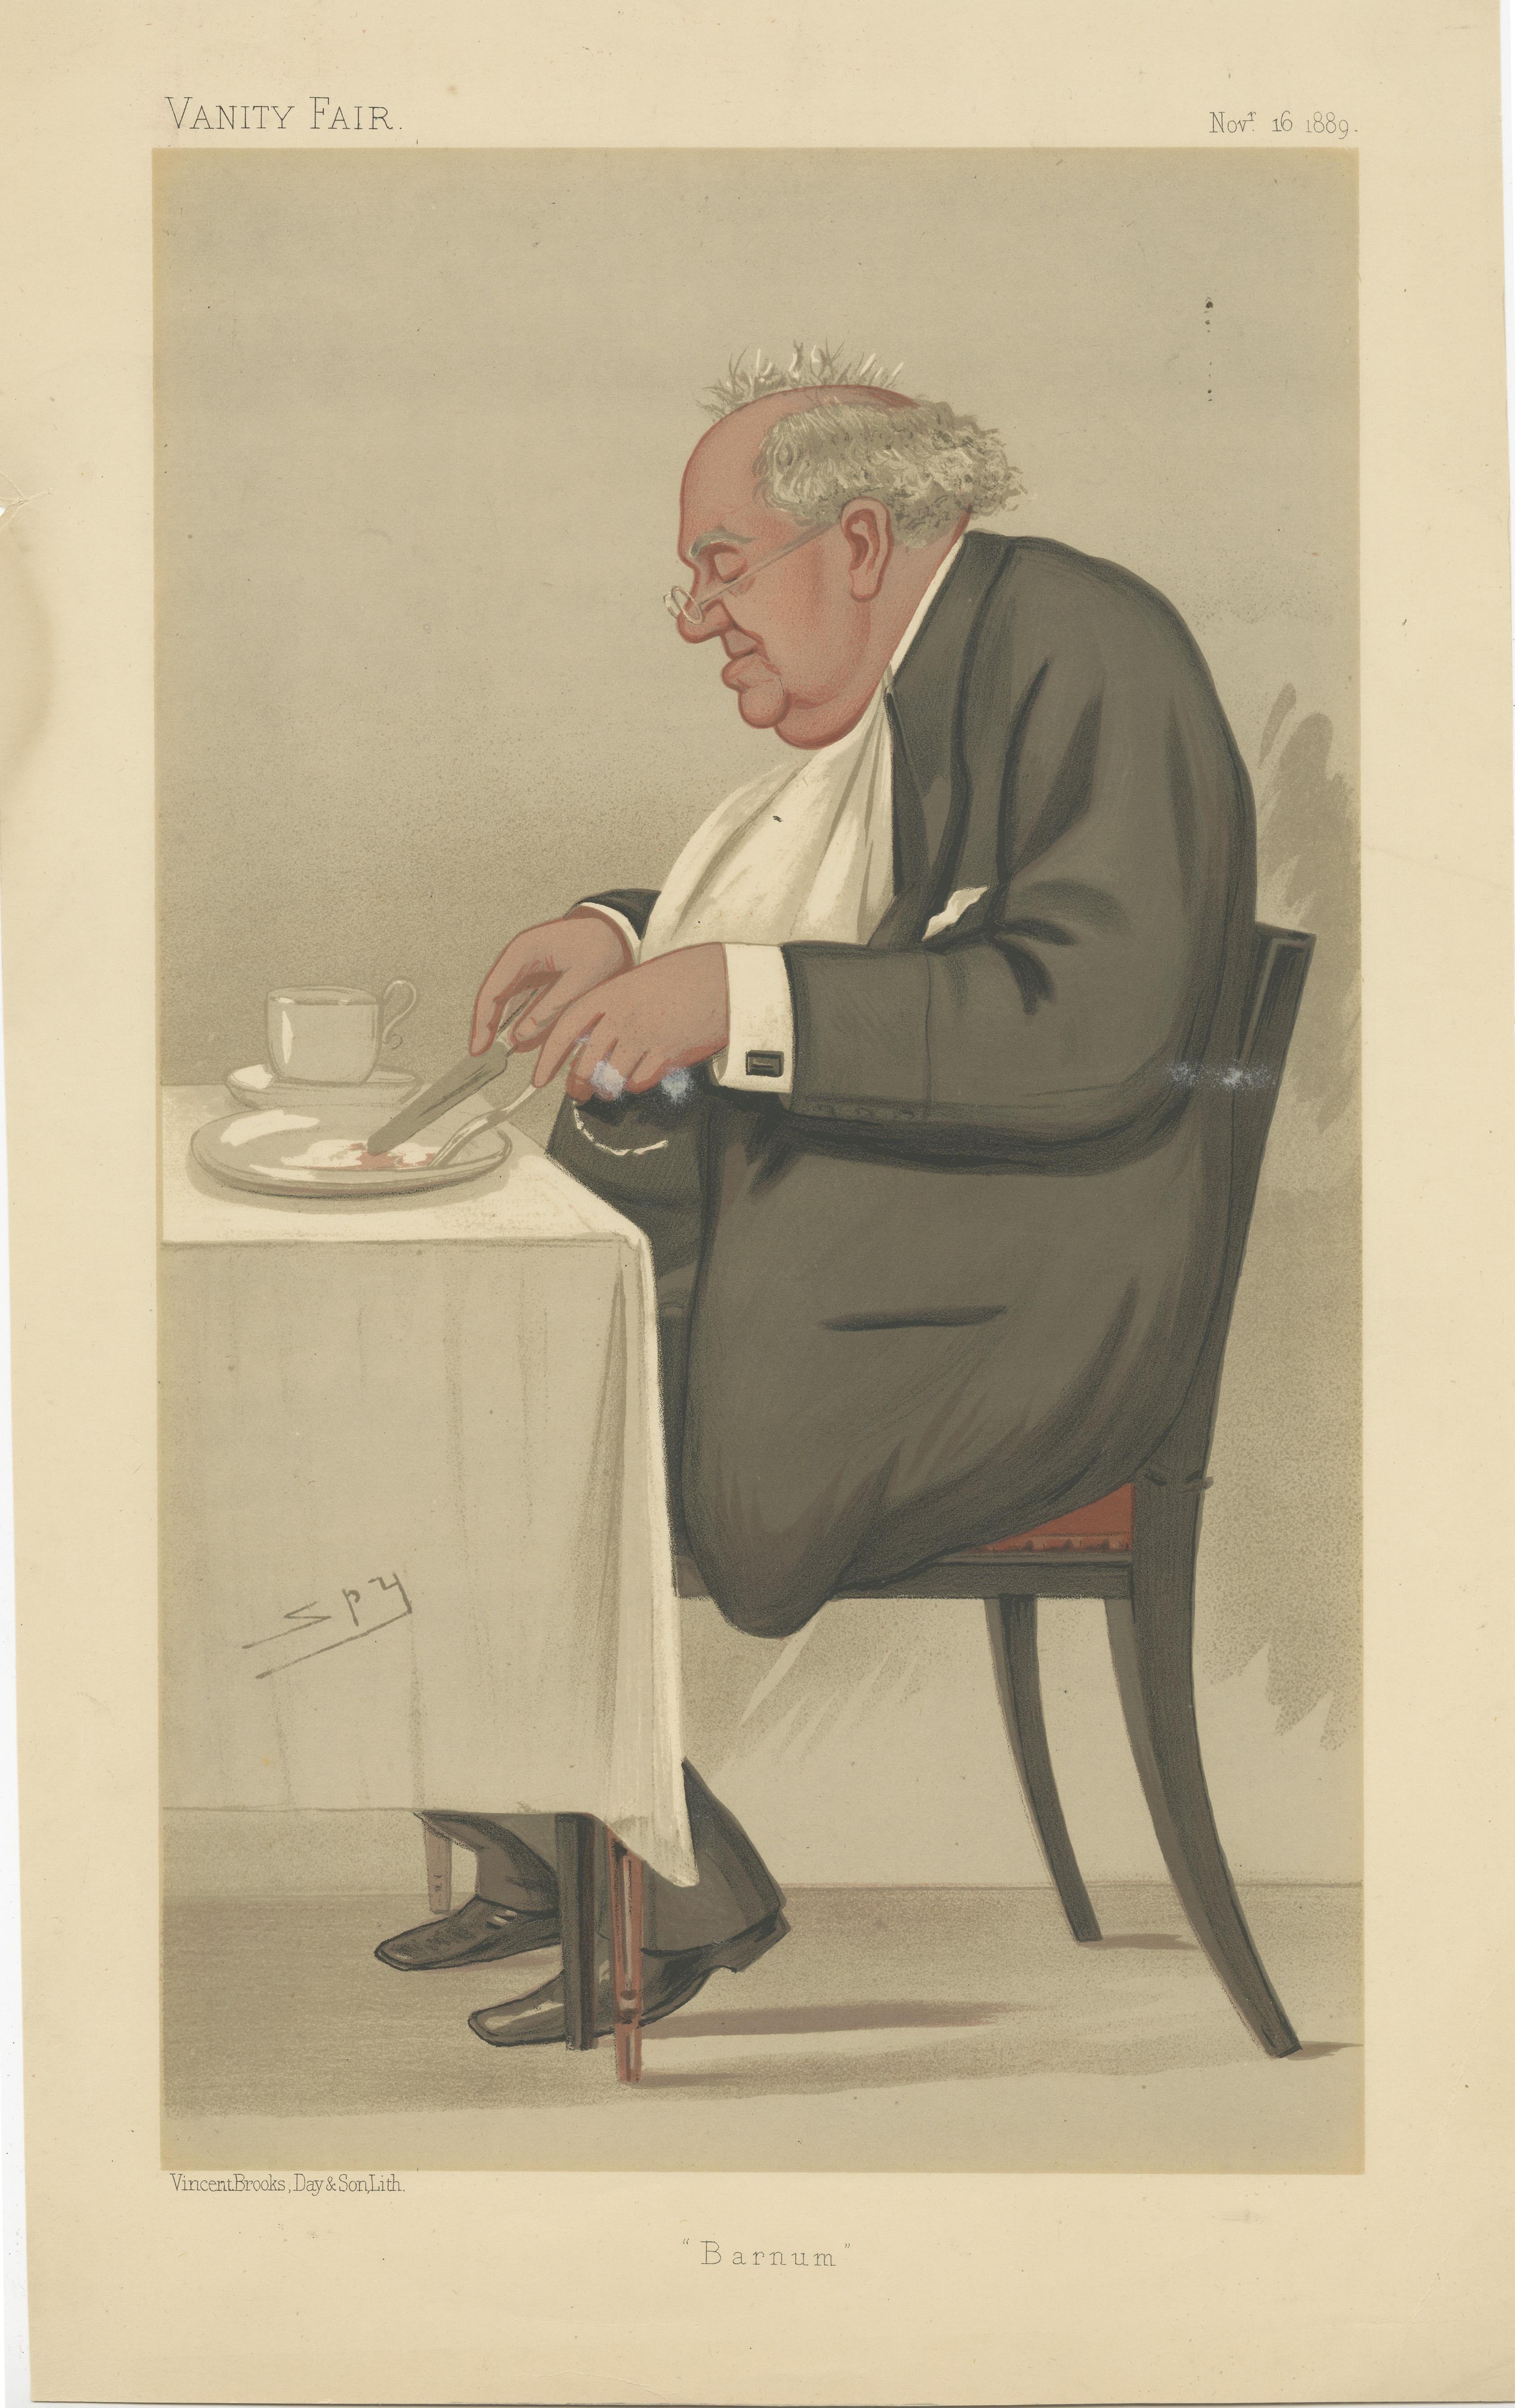 Chromolithograph titled 'Barnum'. Lithograph of P. T. Barnum. Phineas Taylor Barnum was an American showman, businessman, and politician, remembered for promoting celebrated hoaxes and founding the Barnum & Bailey Circus (1871–2017) with James